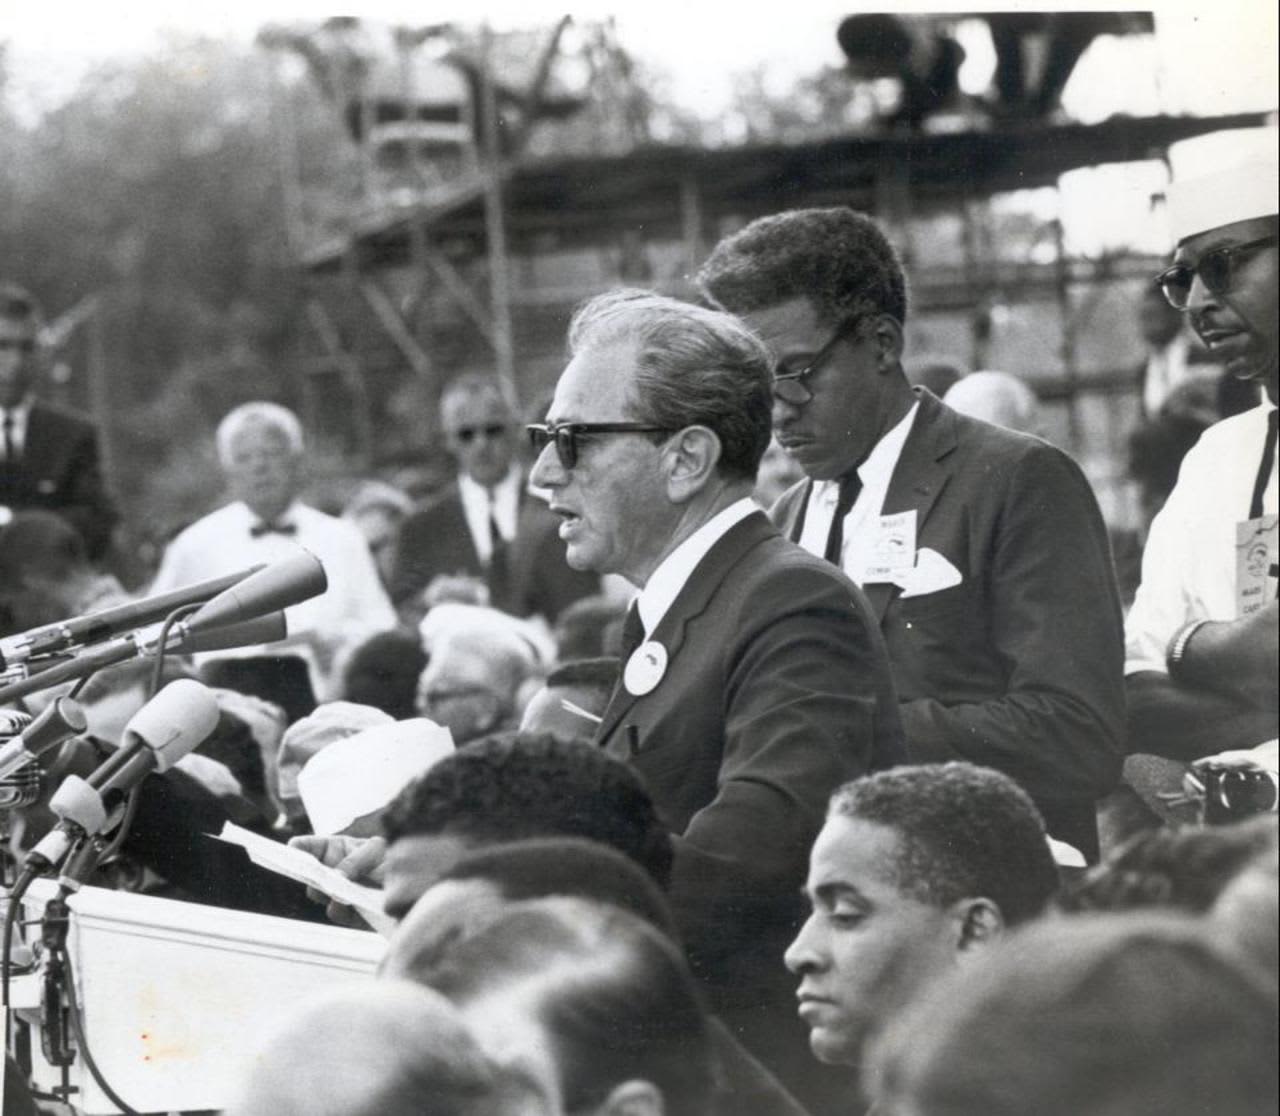 Rabbi Joachim Prinz speaking at the historic March on Washington for Jobs and Freedom in 1963.